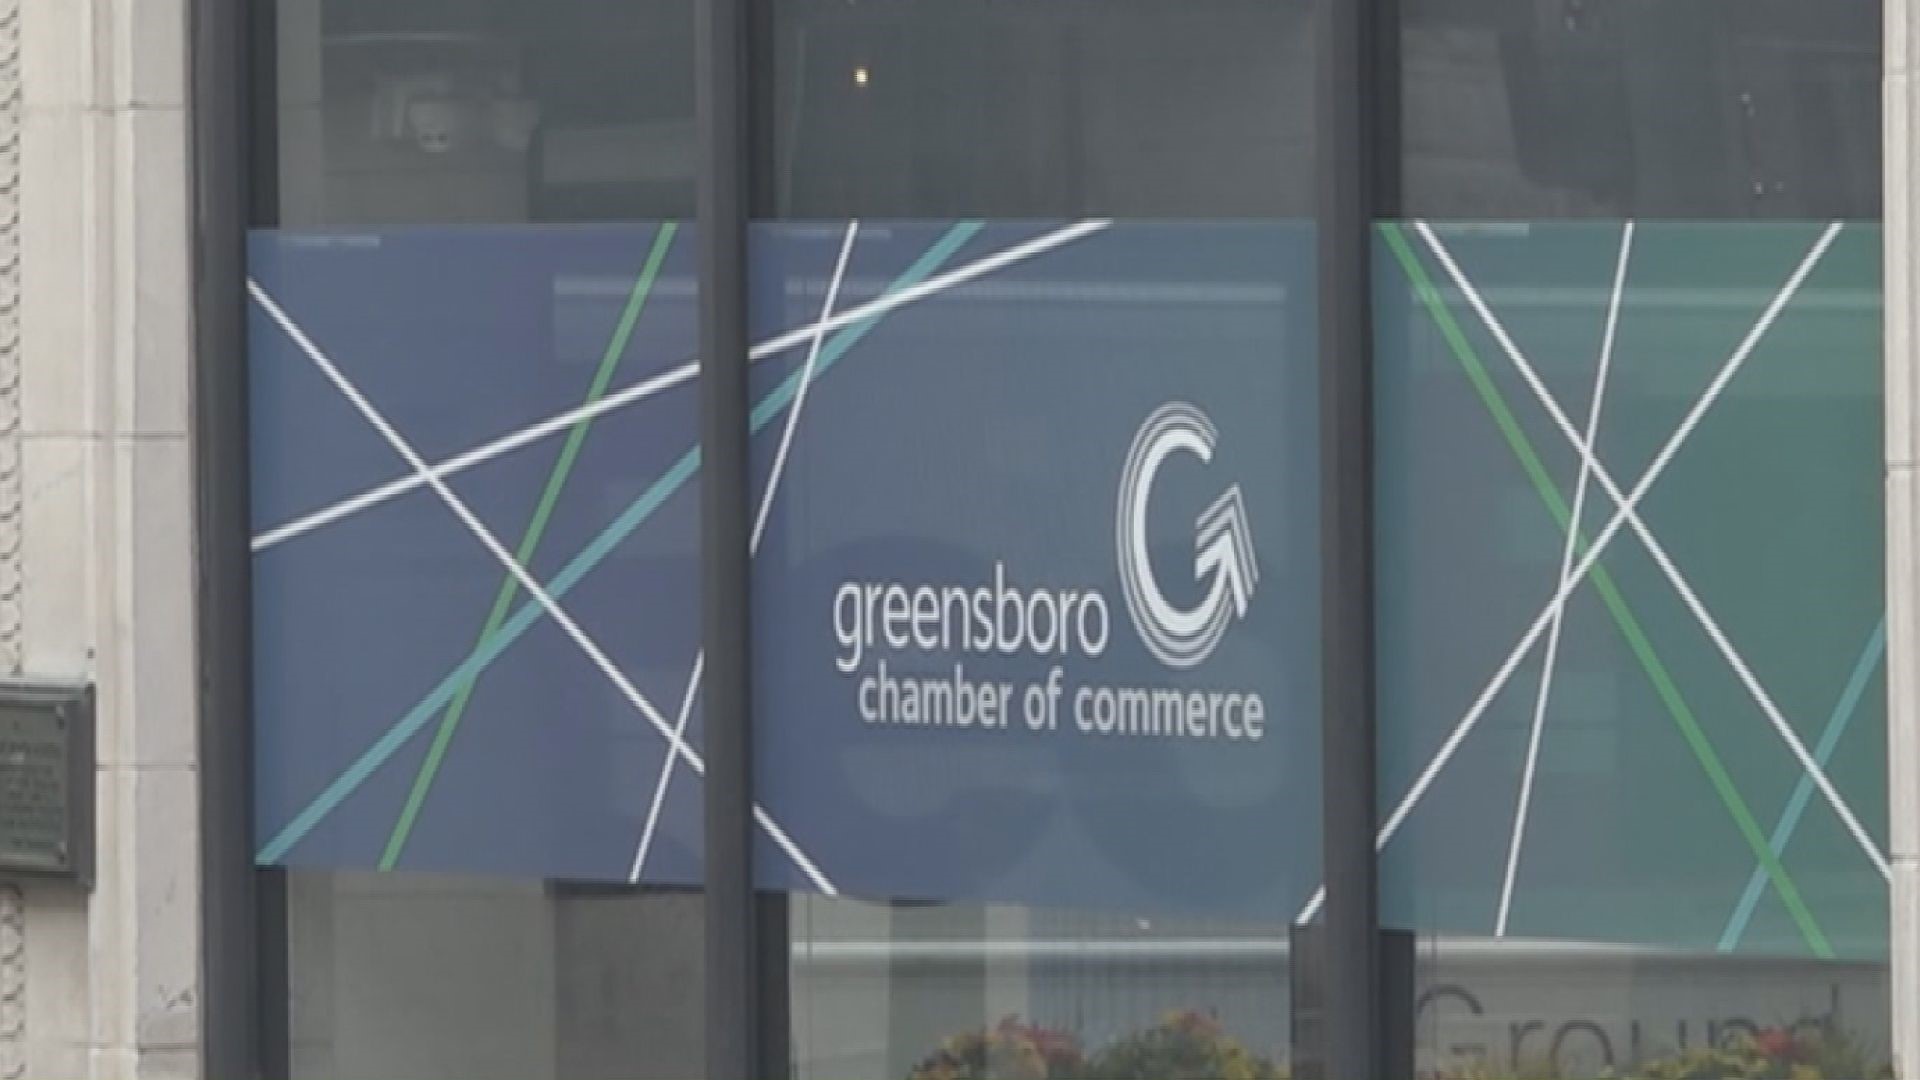 The U.S. Chamber of Commerce honored Greensboro's Chamber with a 5-star accreditation. Less than 2% of the nation's Chambers have this distinction.